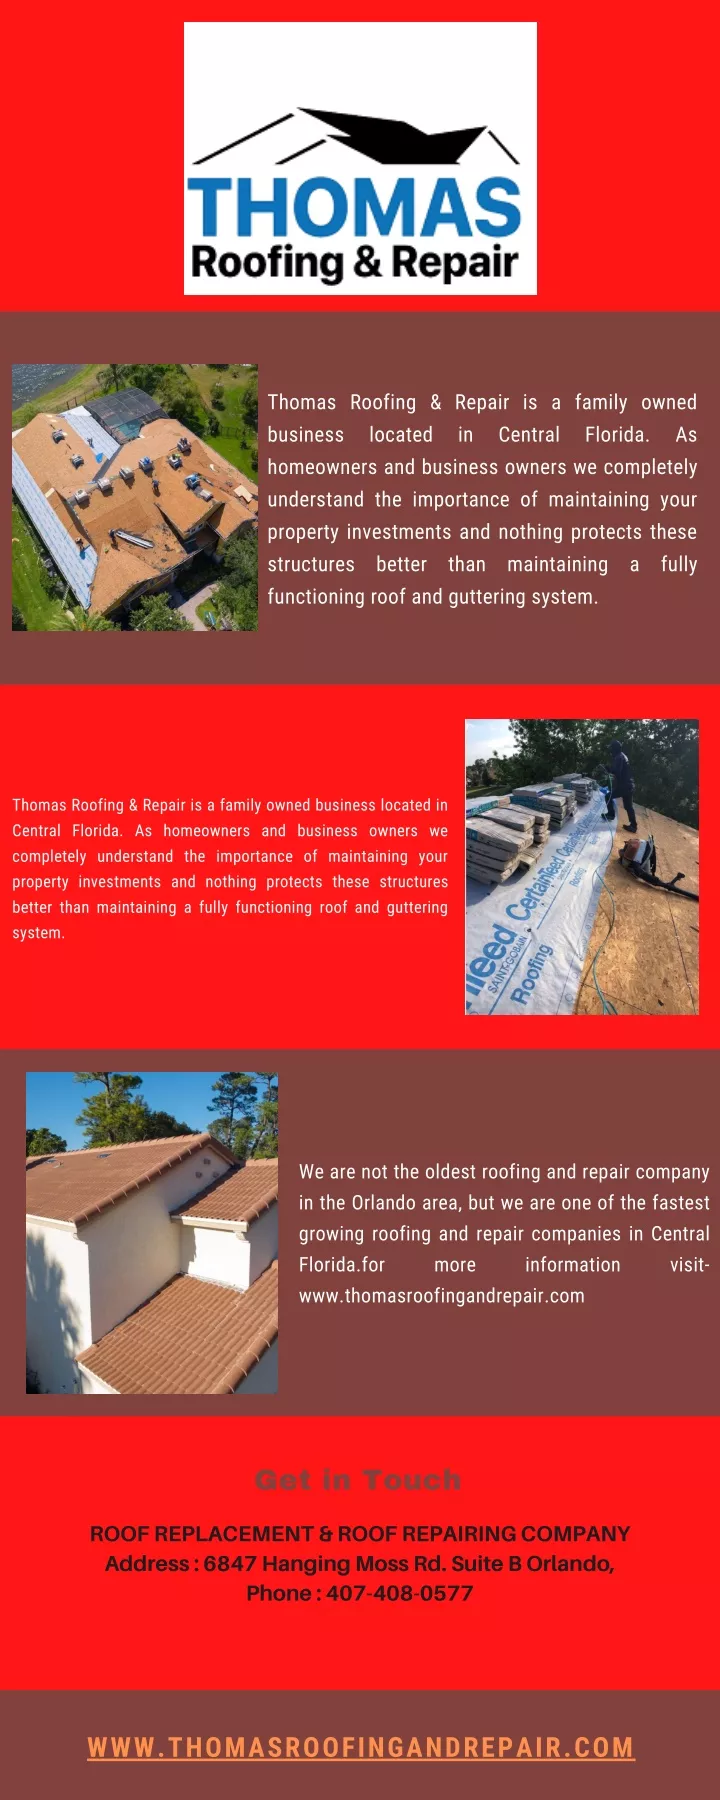 thomas roofing repair is a family owned business